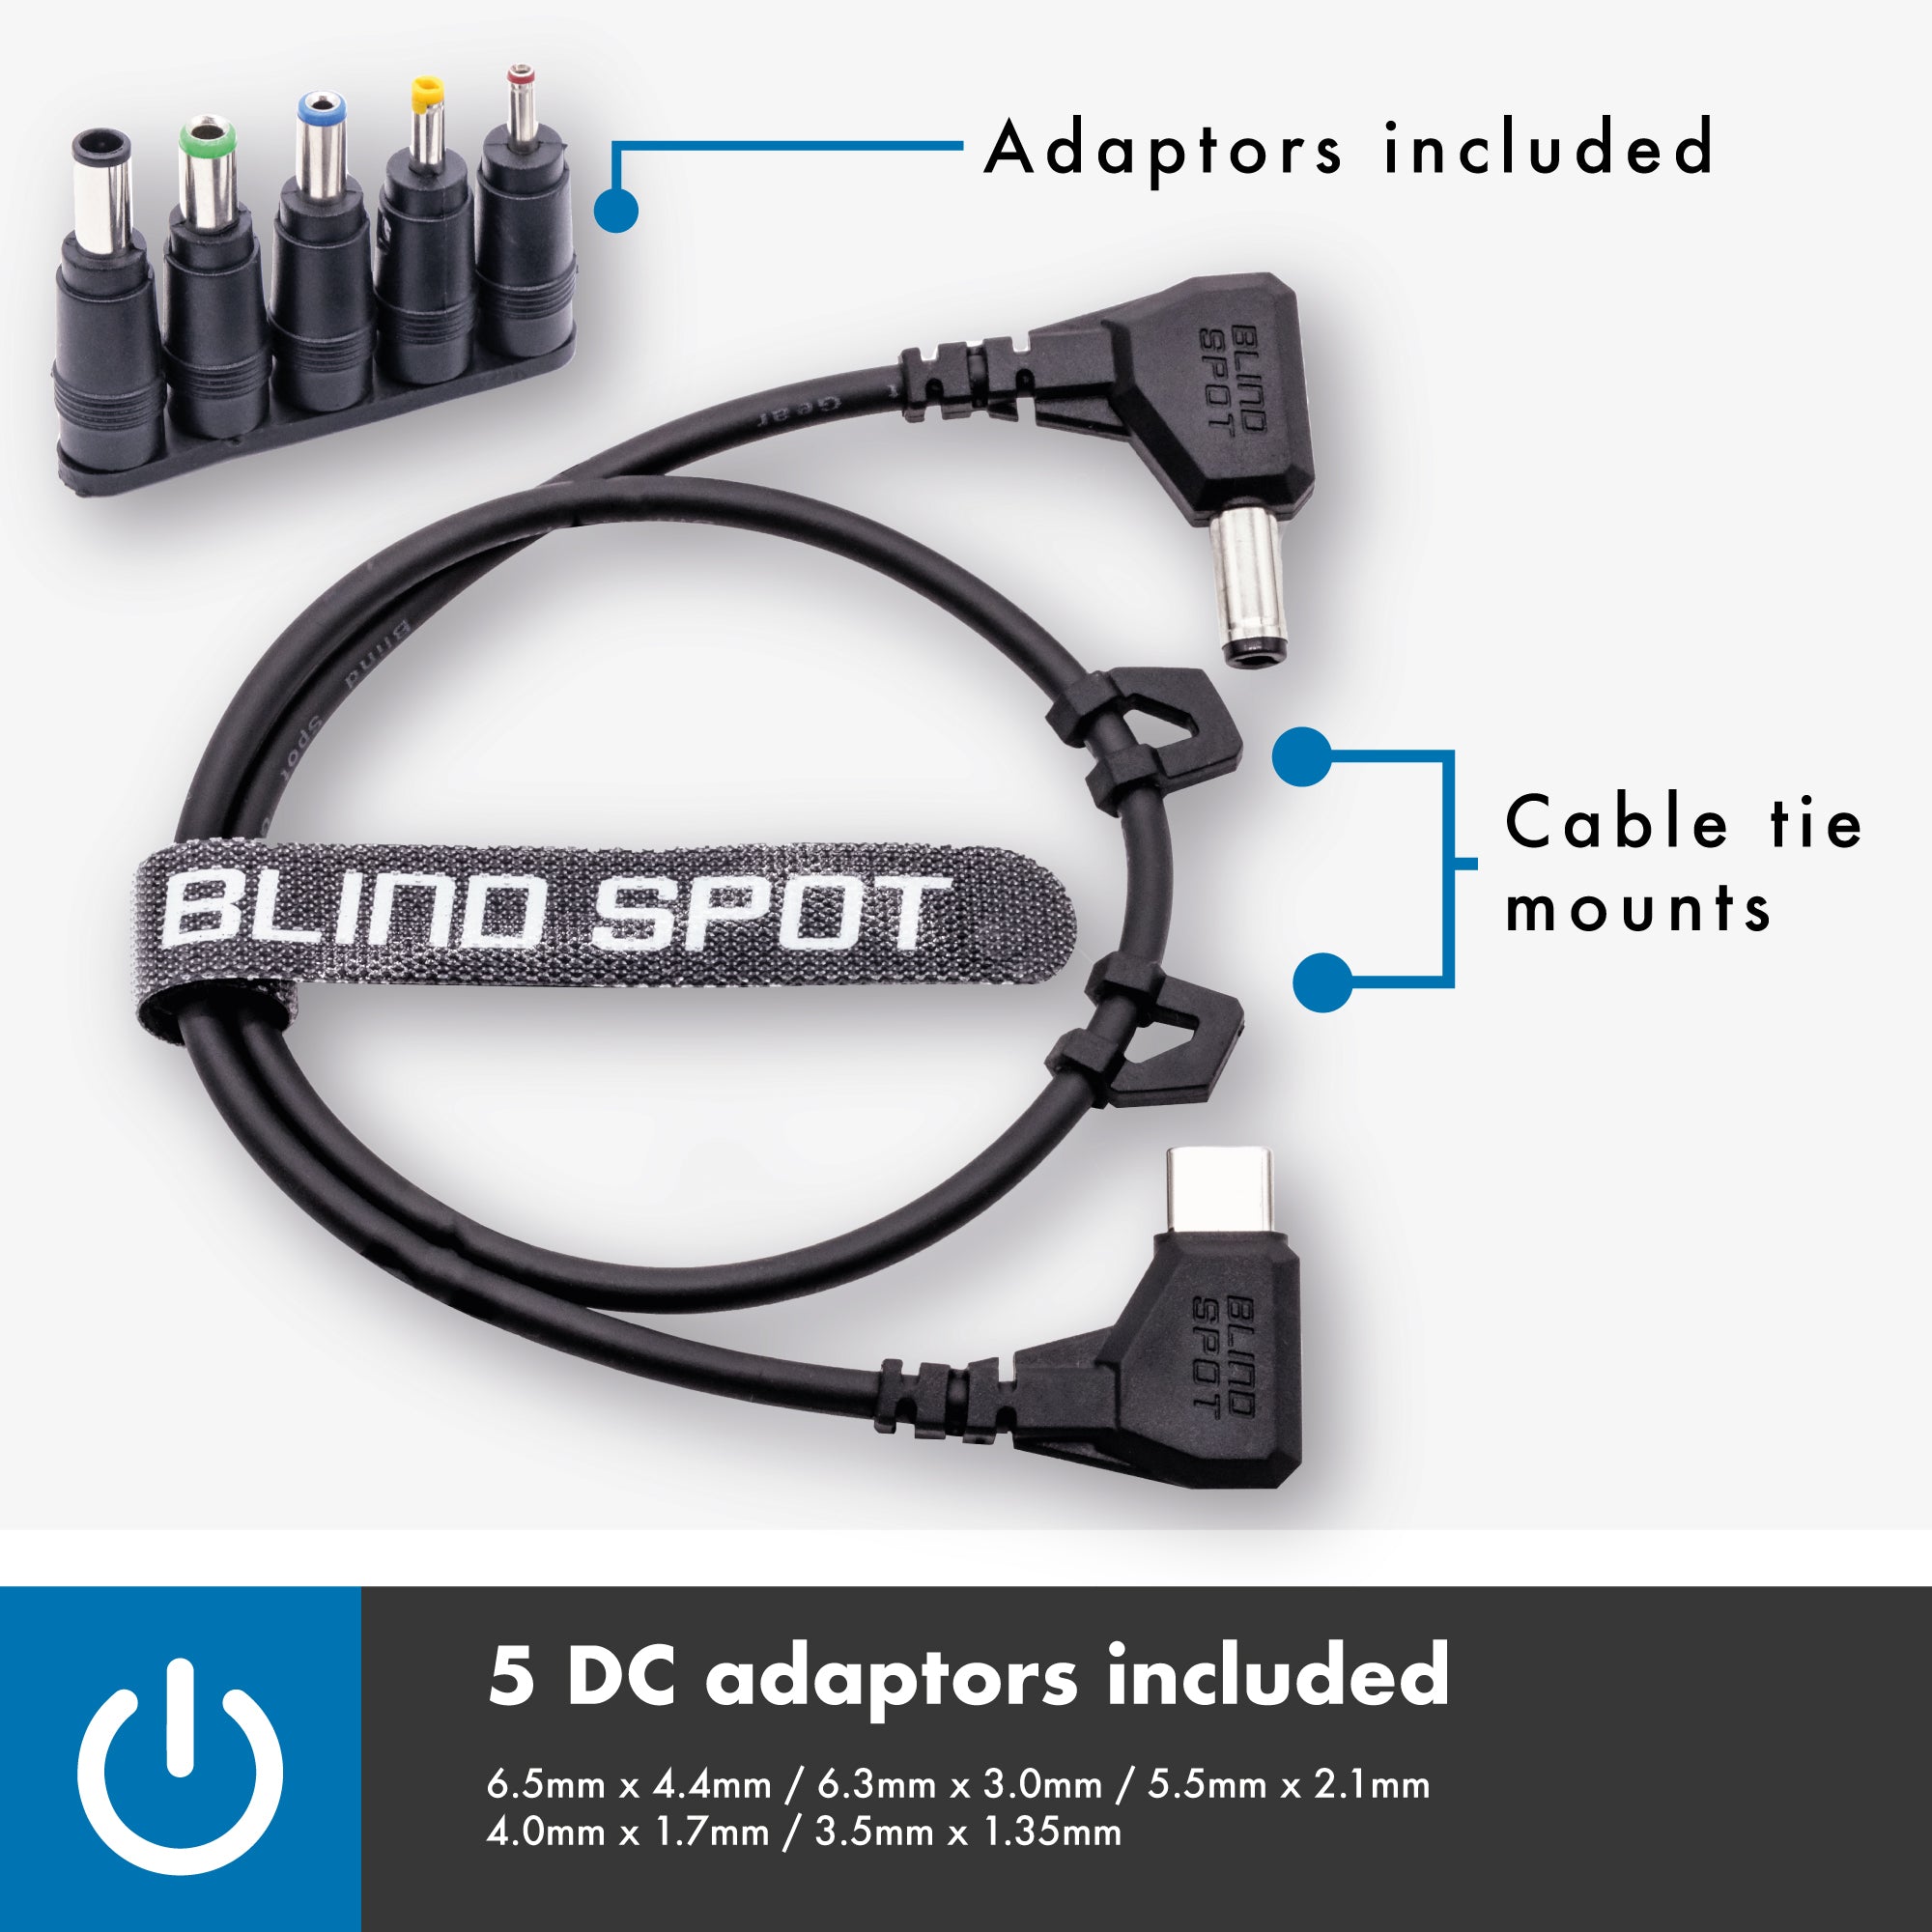  Blind SPOT - USB to 12V Adapter - 12 Volt DC Power Cable - Use  Any PD USBC Power Bank to Power Any 12V Device - Turn Your Power Bank into